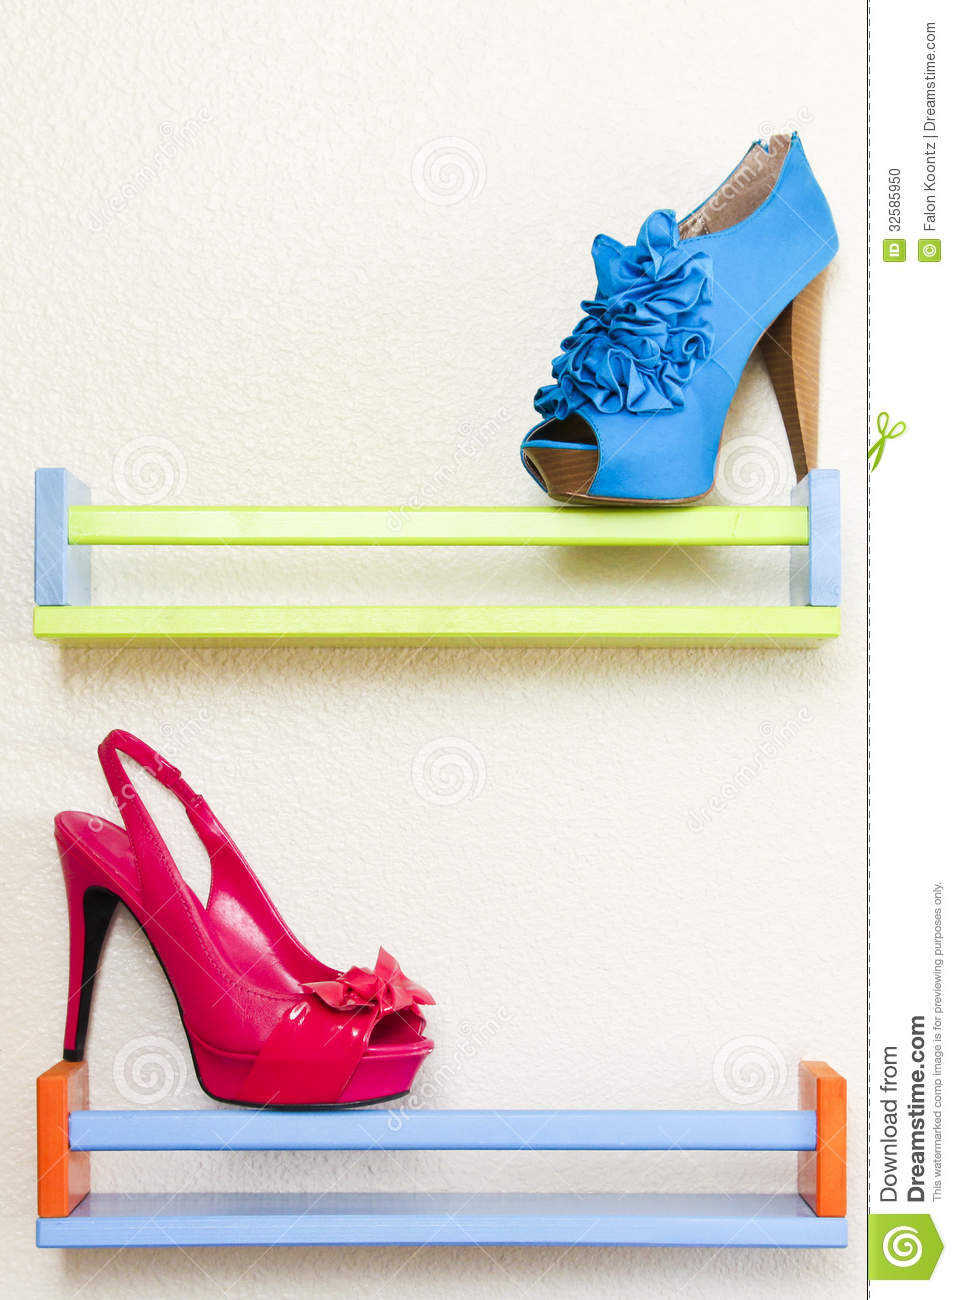 Hot Pink High Heel And Blue Ruffled High Heel Balancing On A Blue And